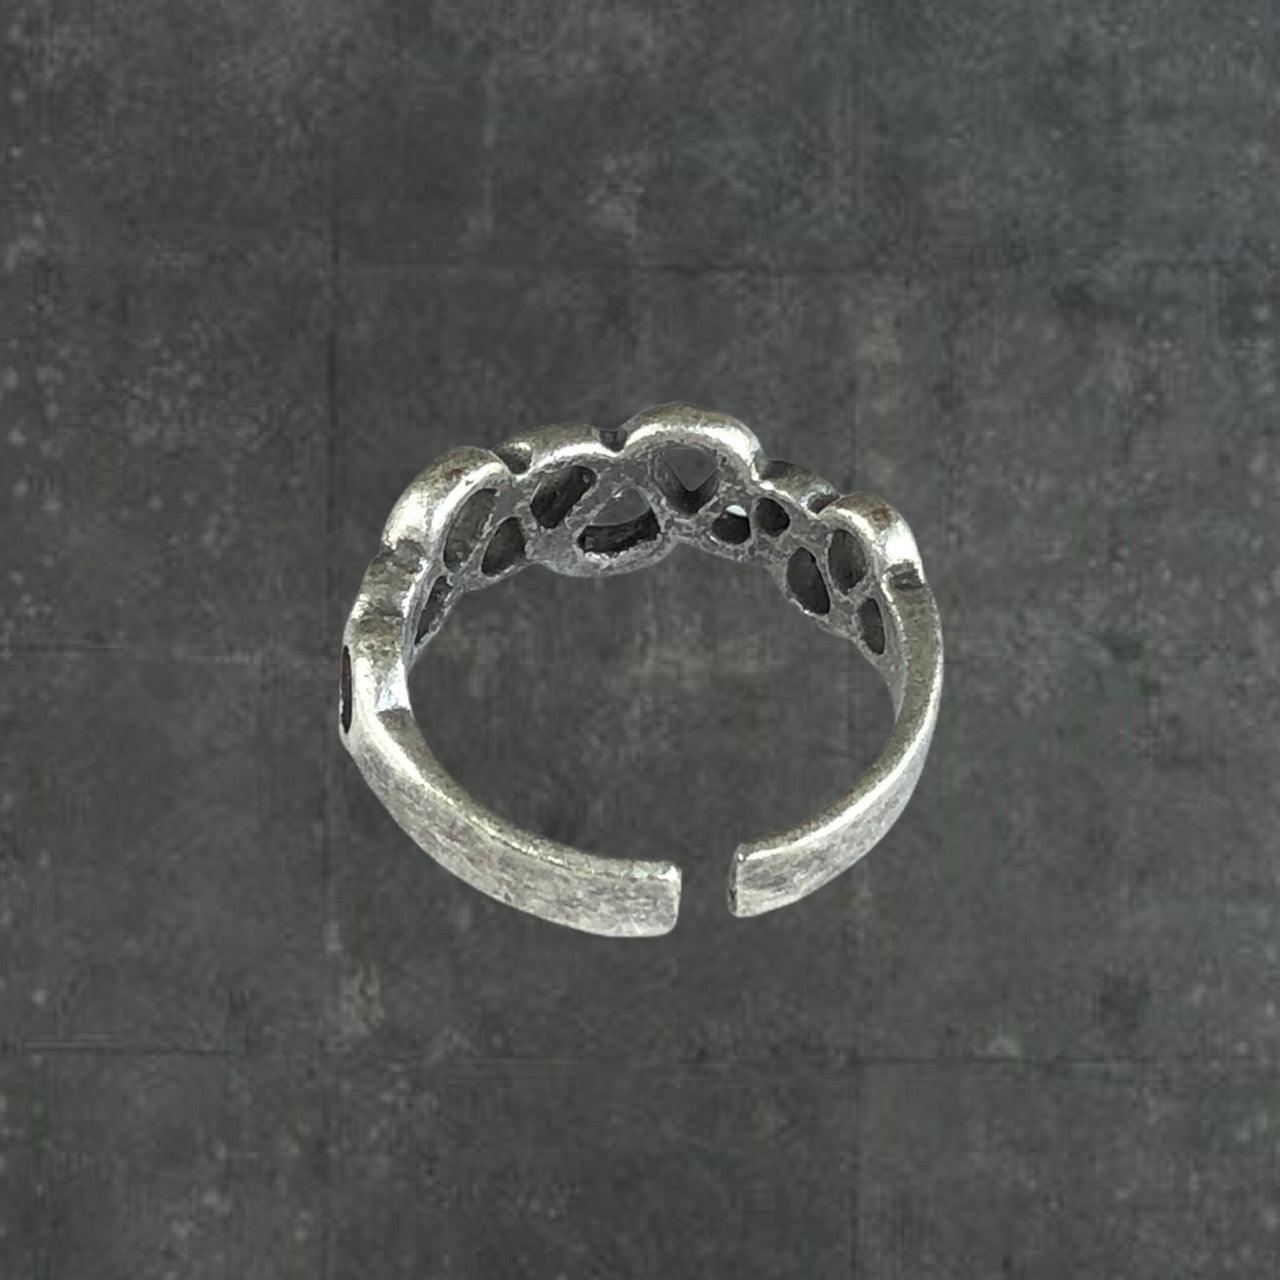 Octopus Ring - Known Source